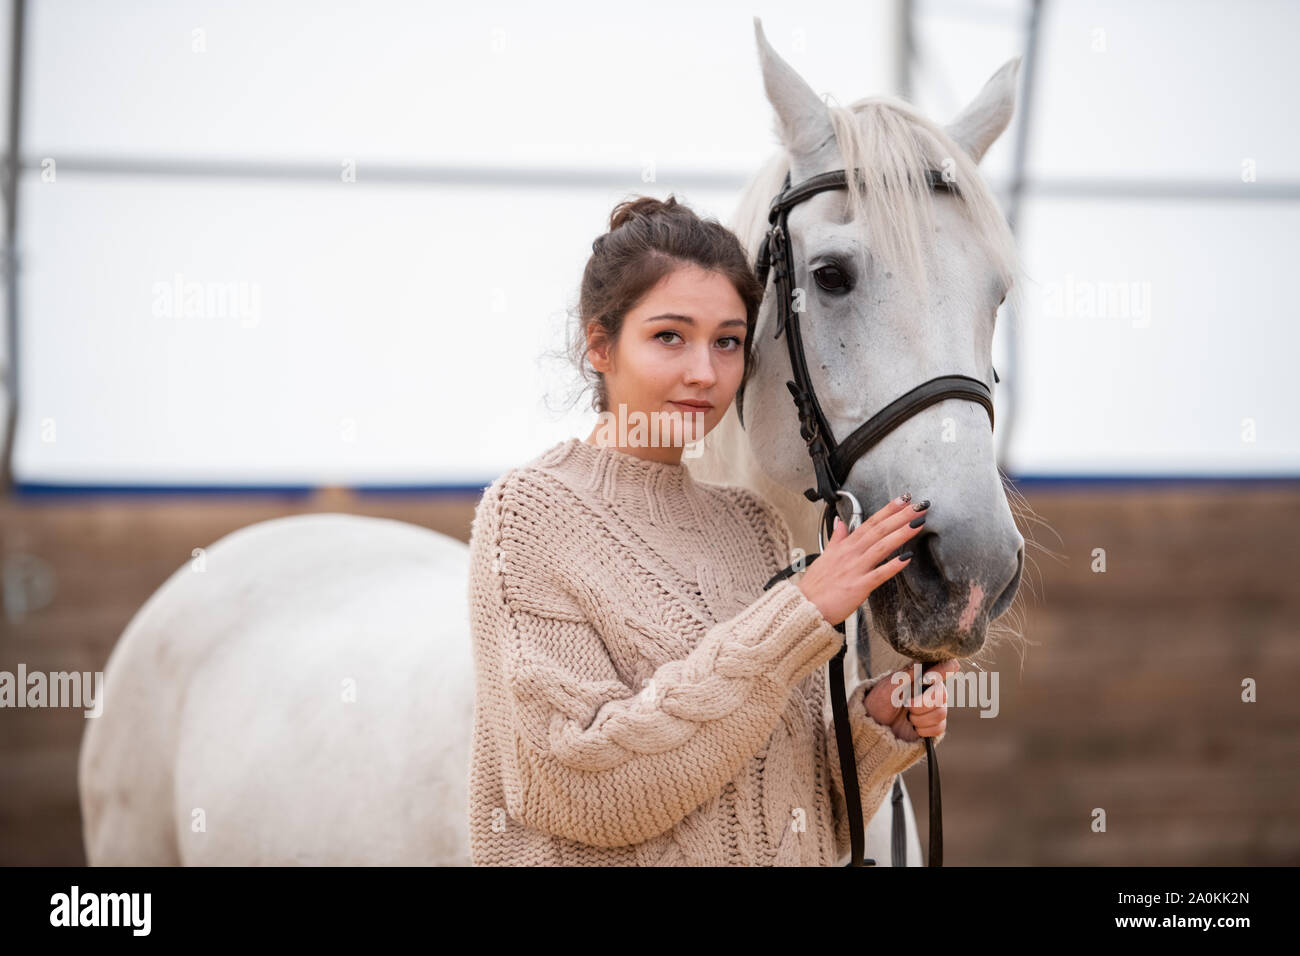 Calm young casual woman in knitted sweater standing by white purebred horse Stock Photo